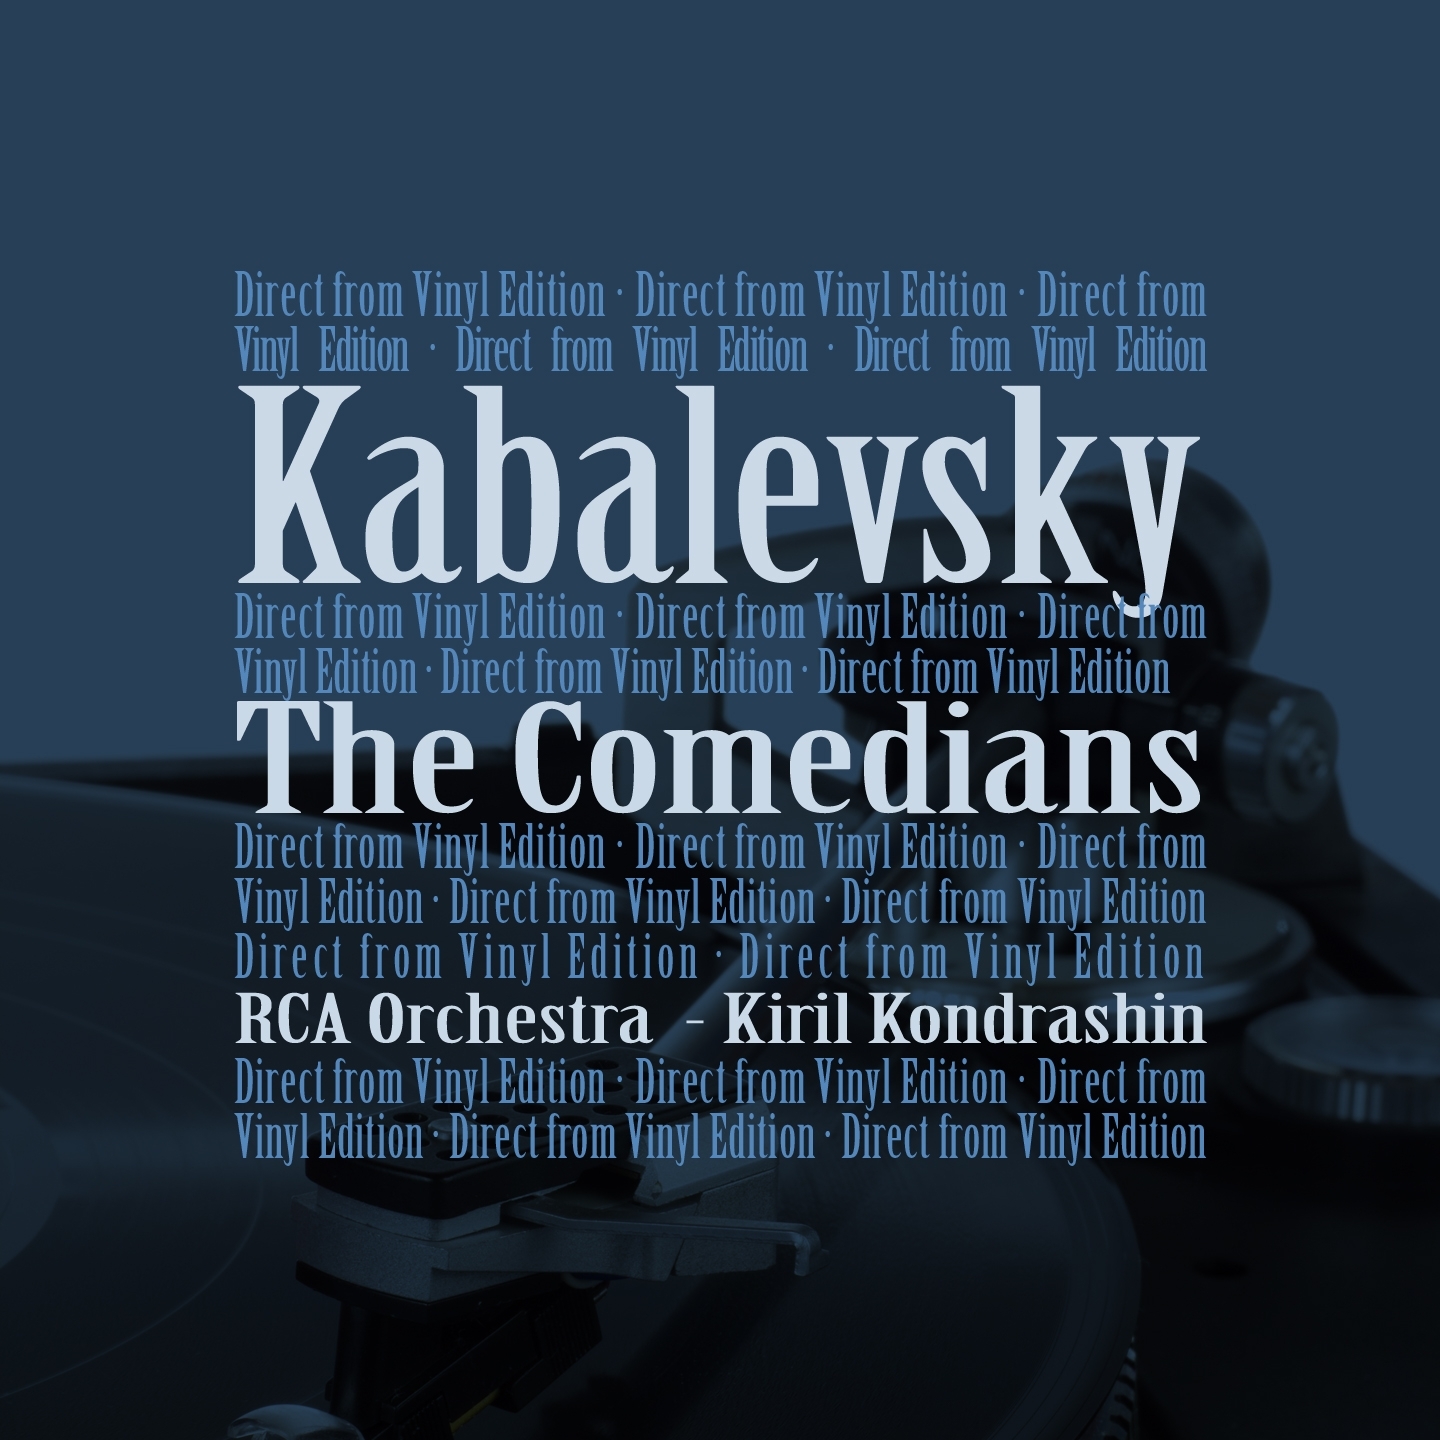 The Comedians, Op. 26: IV. Moderato 'Waltz'